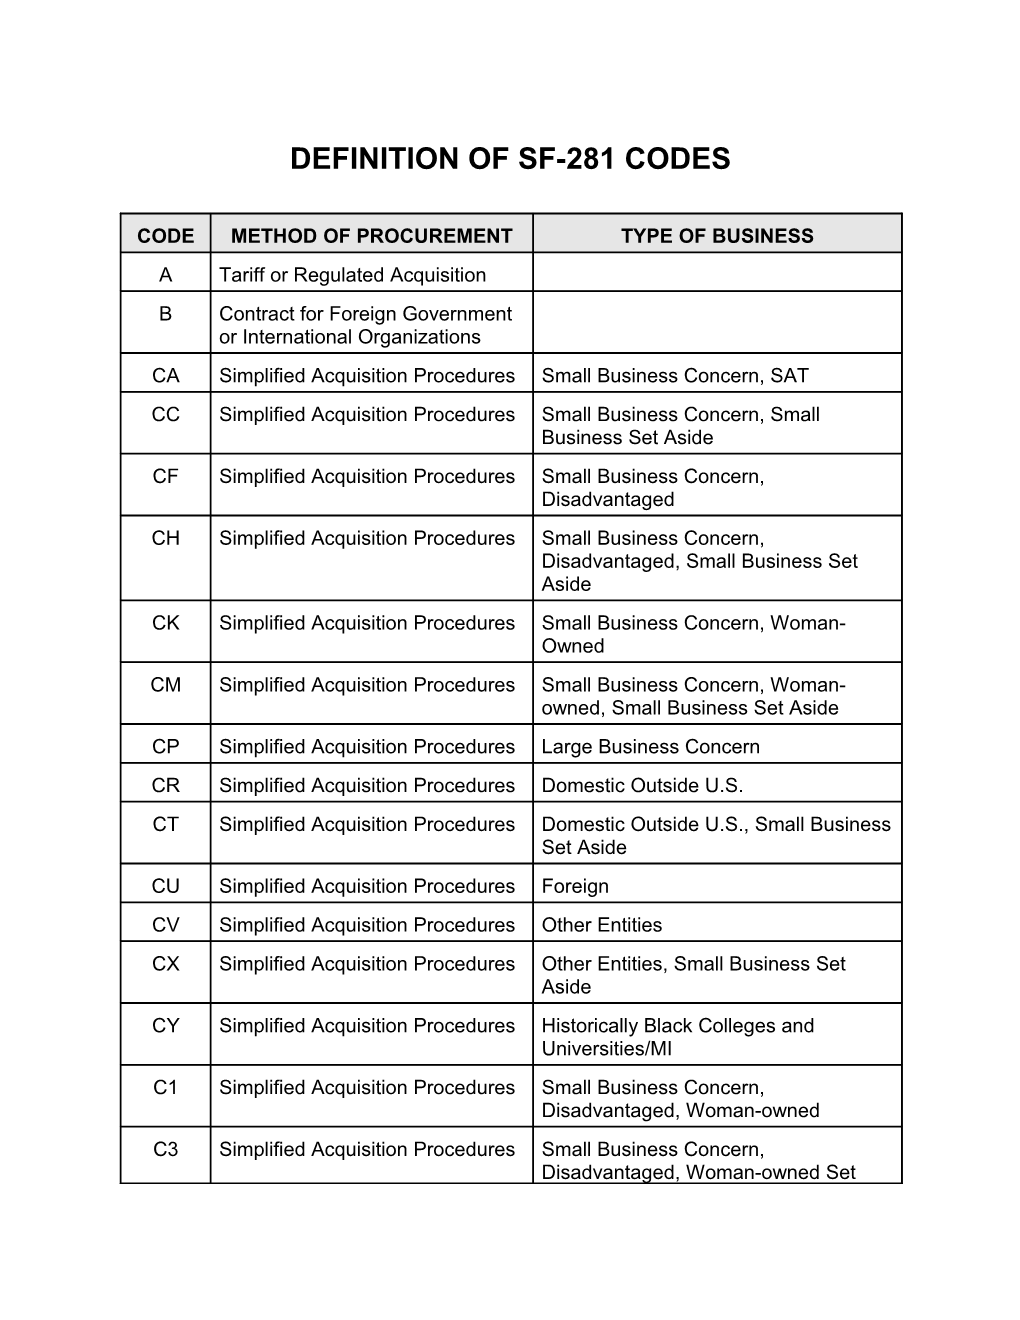 Appendix F: Definition of Sf-281 Codes